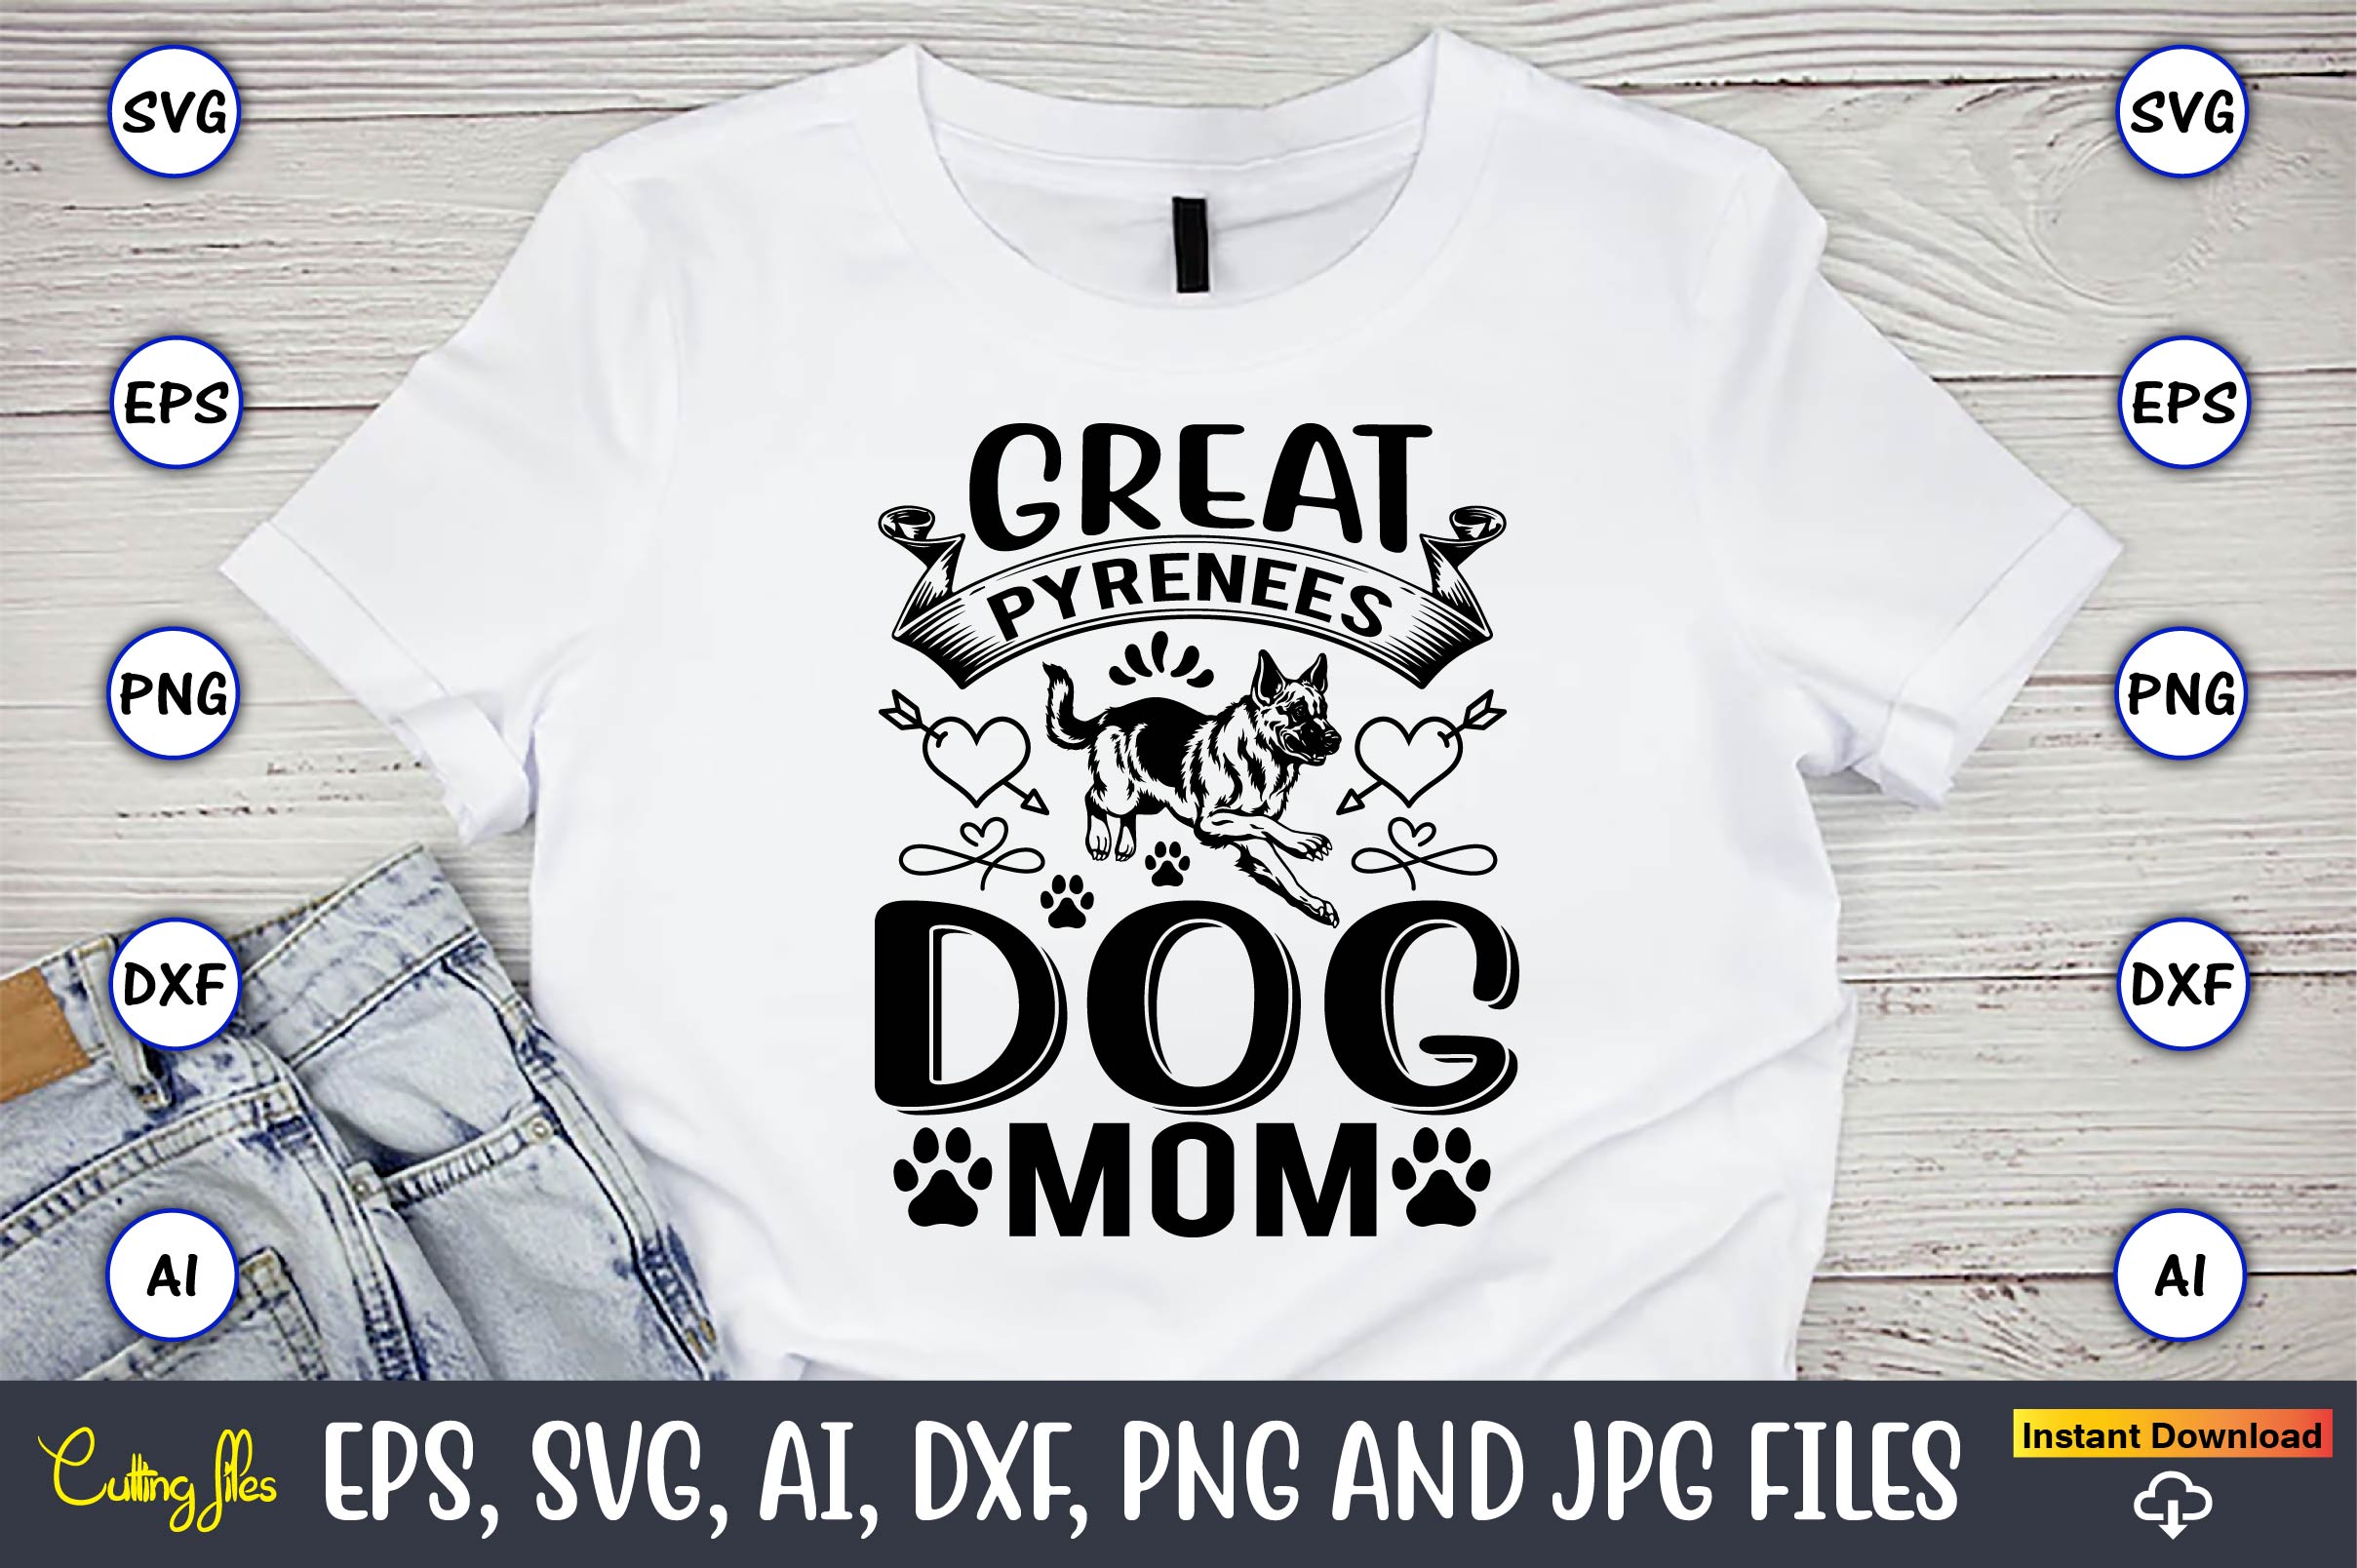 mage of a white t-shirt with an exquisite Great Pyrenees dog mom lettering.